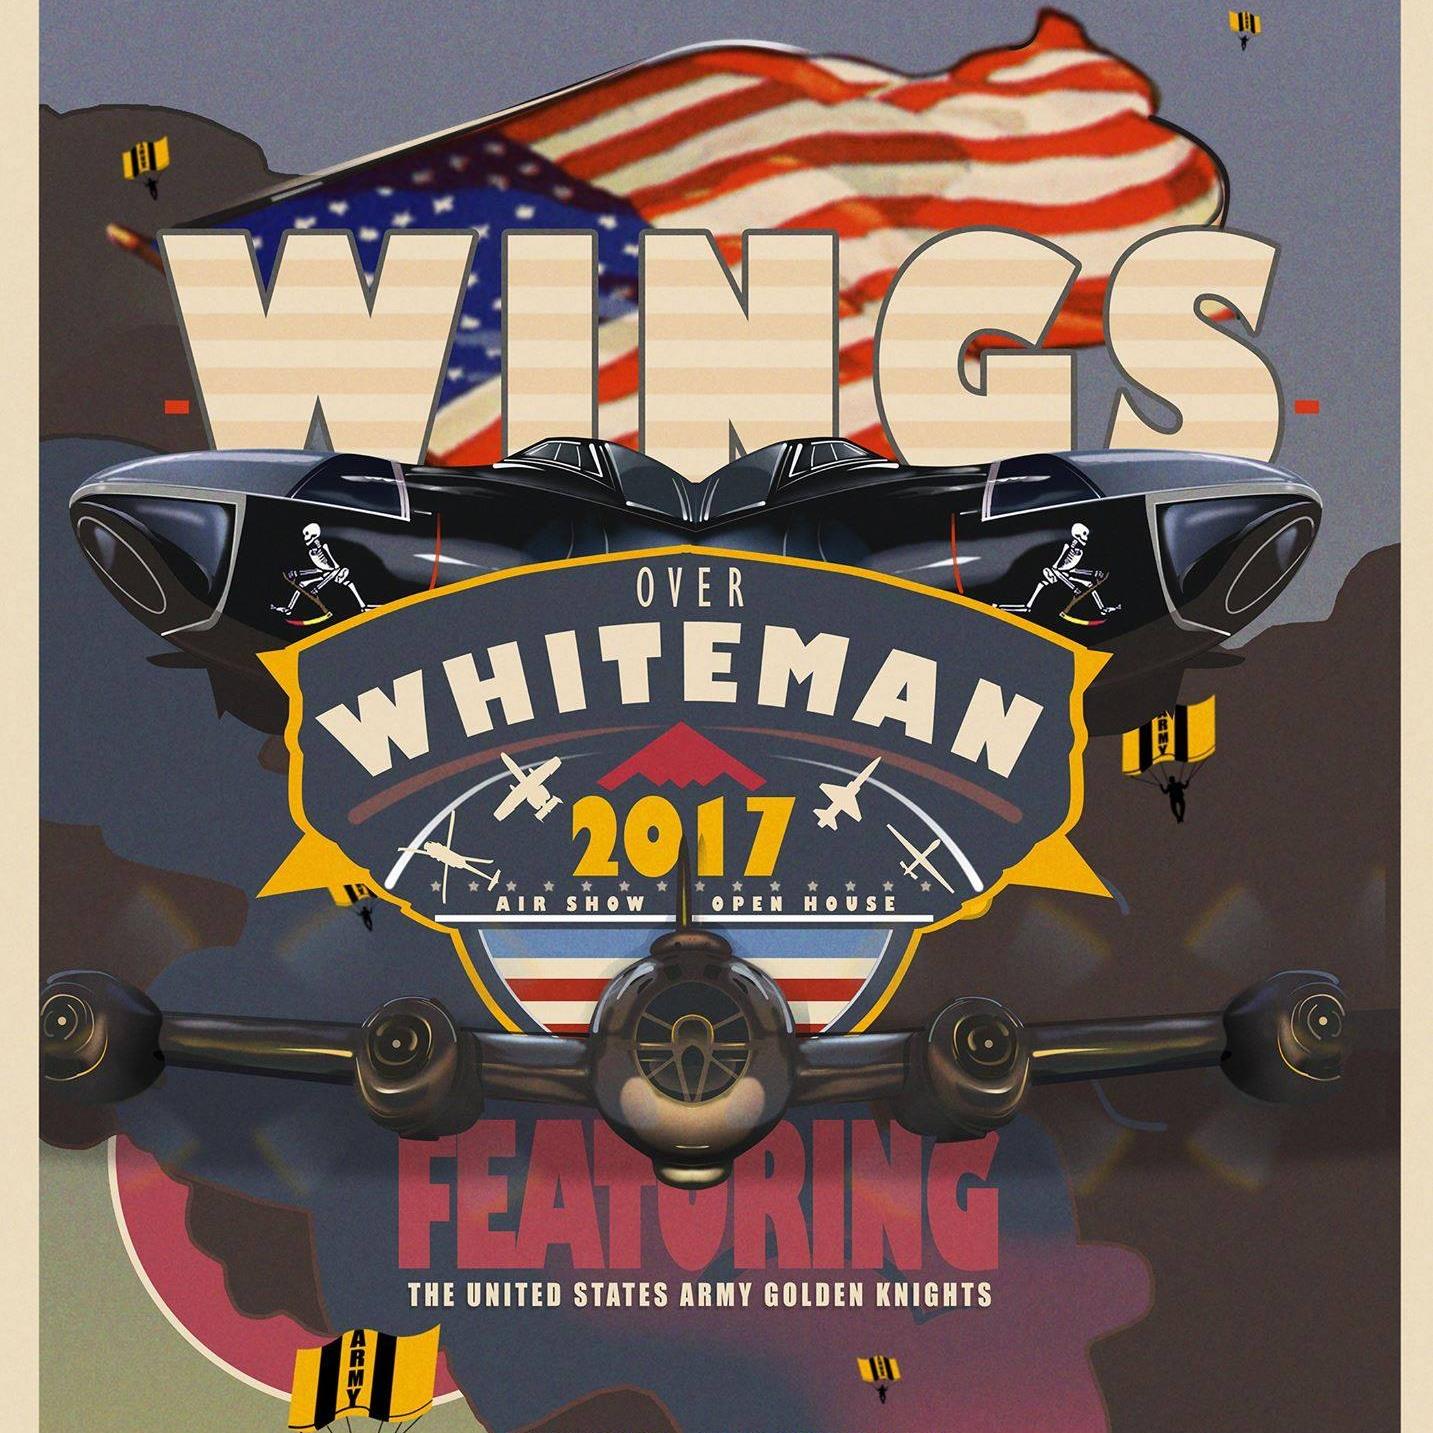 Wings Over Whiteman returns with seven decades of aircraft Central Mo